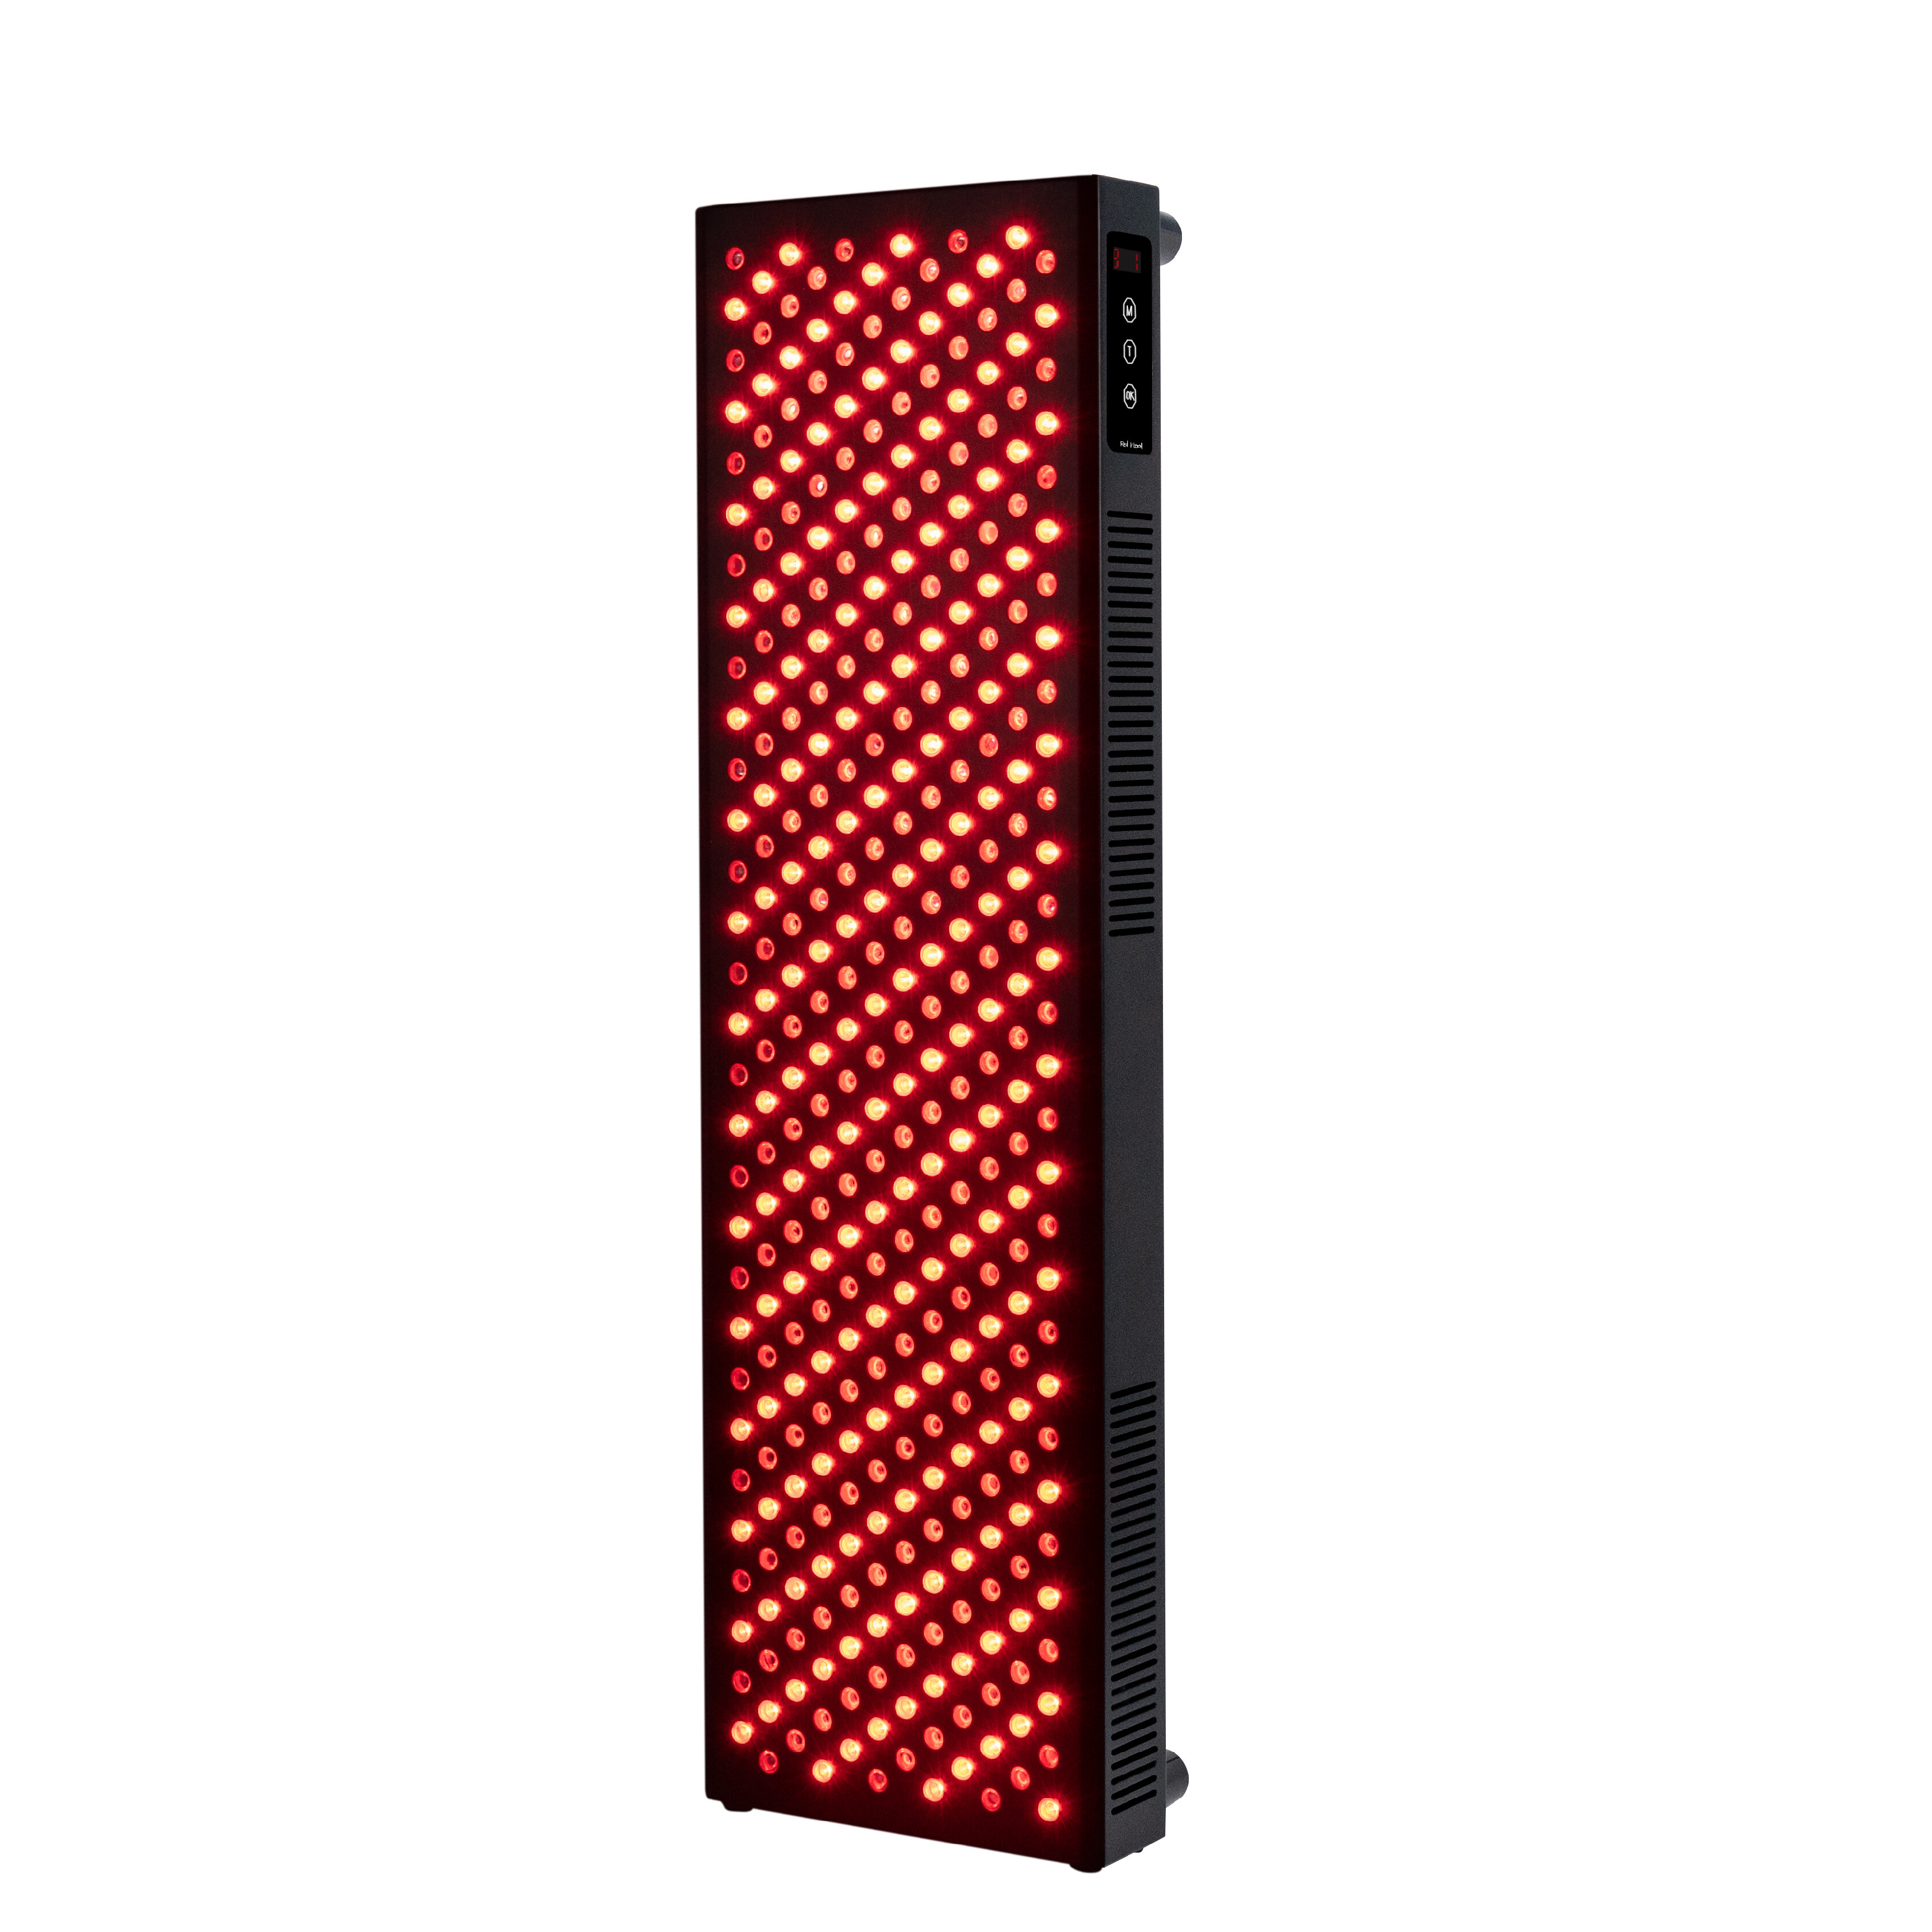 red light therapy device and manufacturer, red light therapy manufacturers, light therapy manufacturers, led light therapy manufacturer